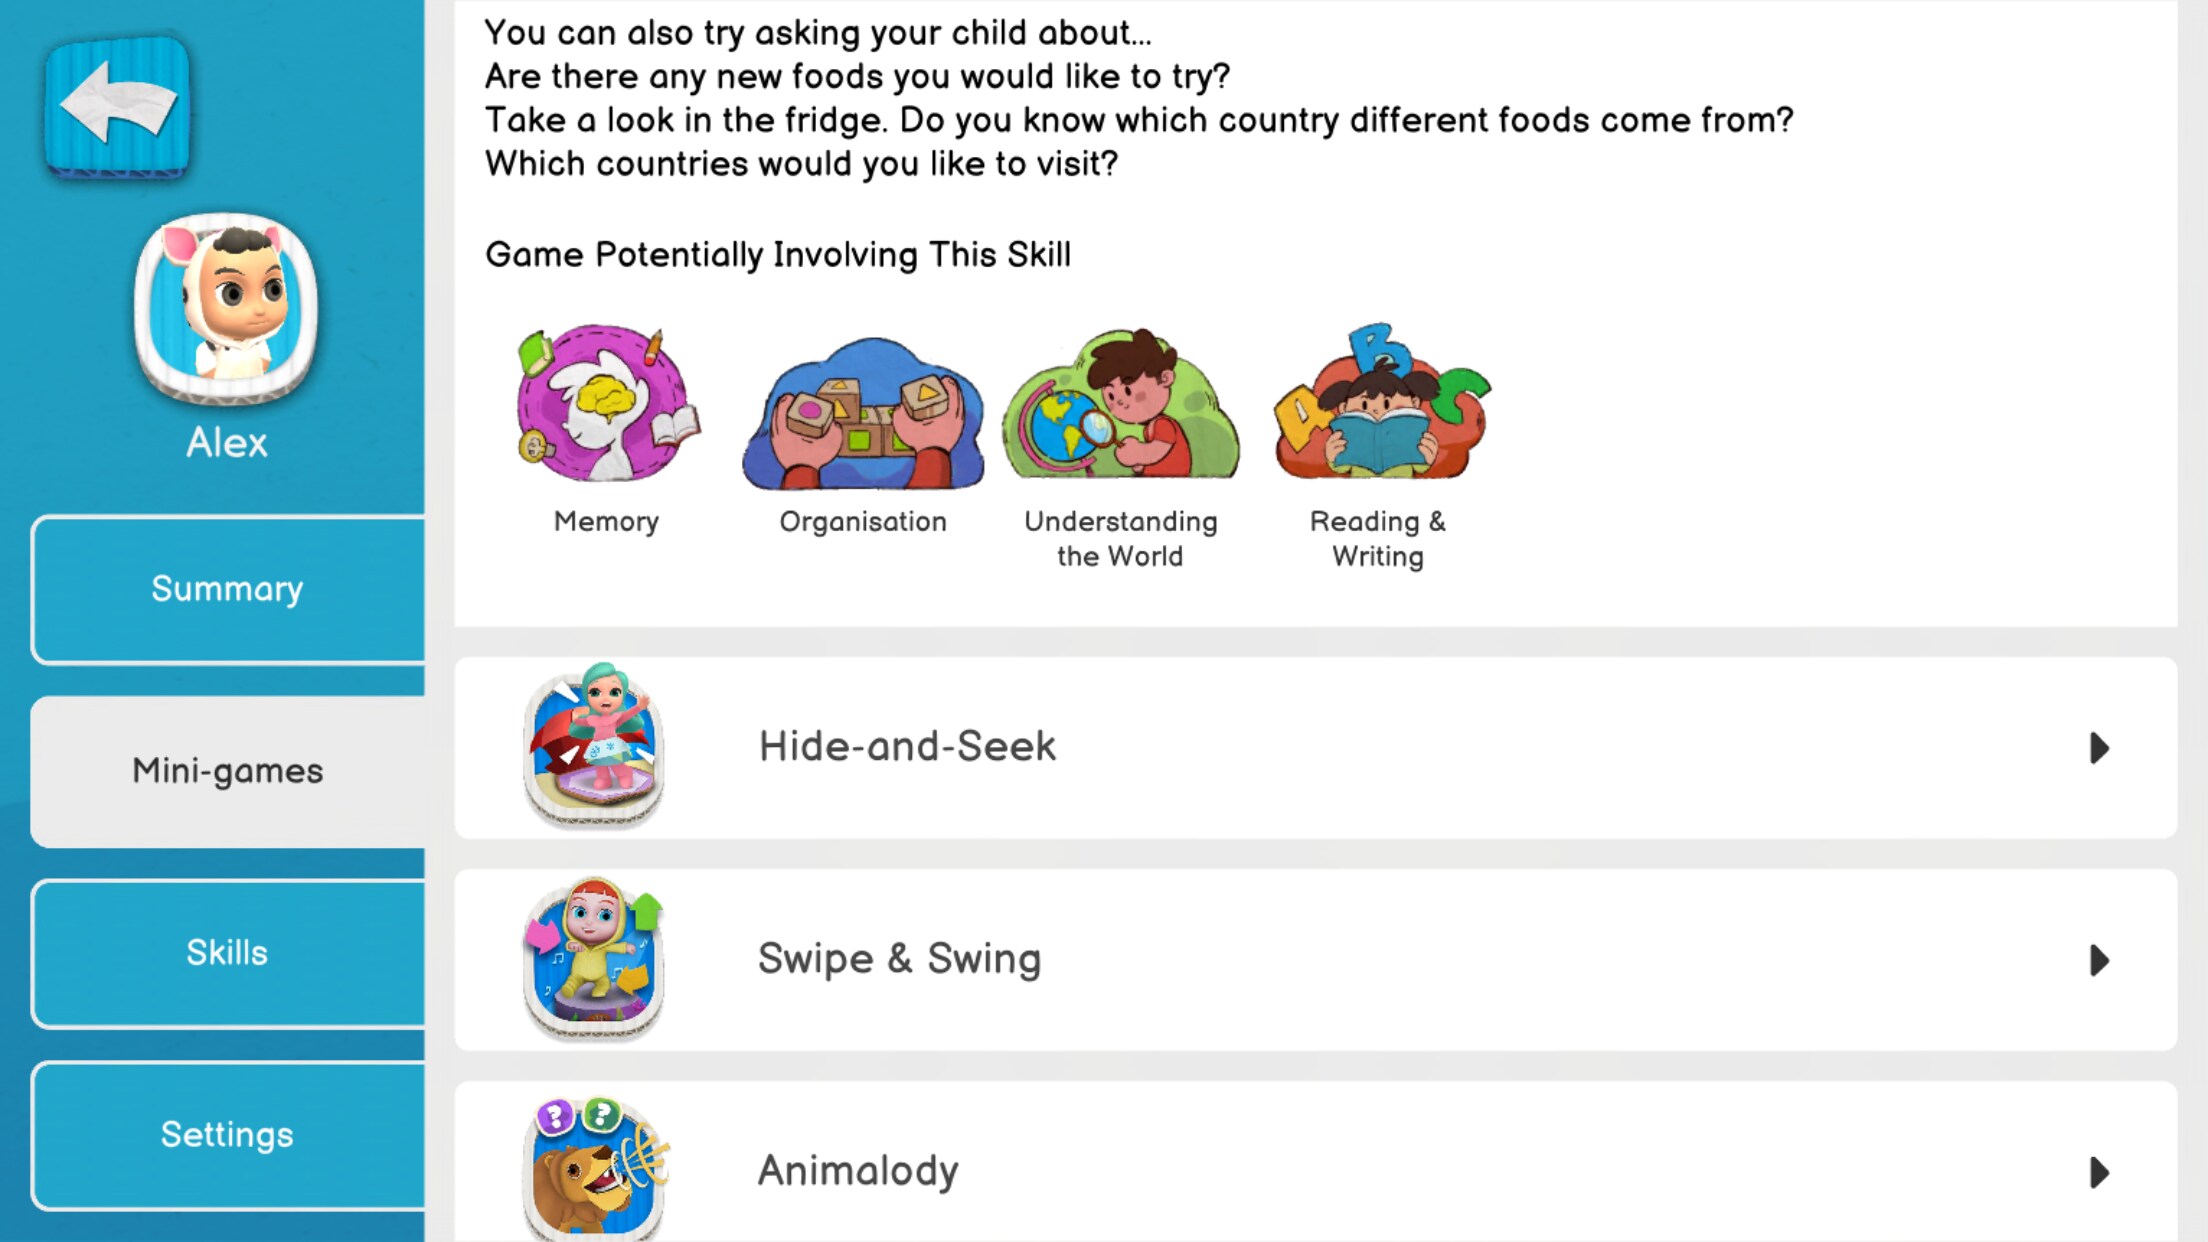 Multiple profiles can be created to customize each child’s experience